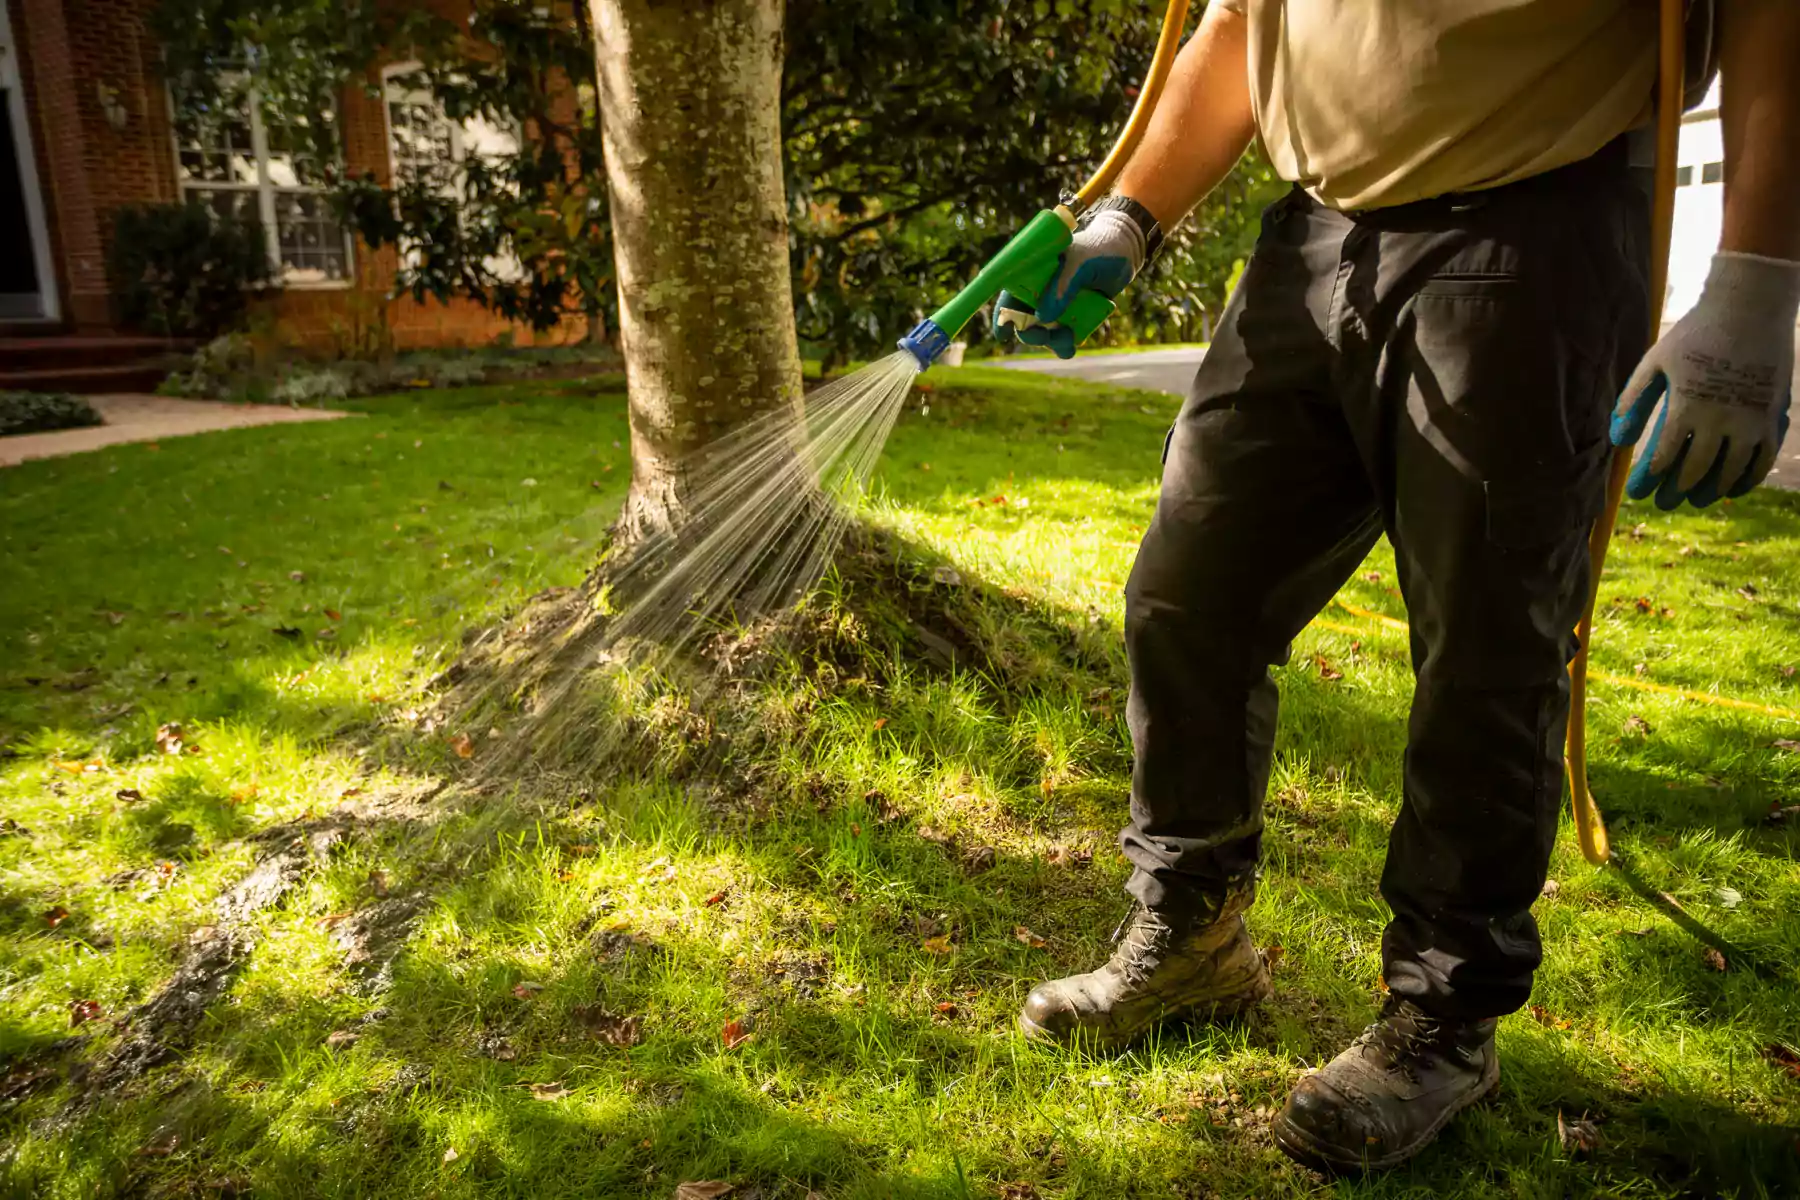 lawn care team uses hand-held spray to treat lawn